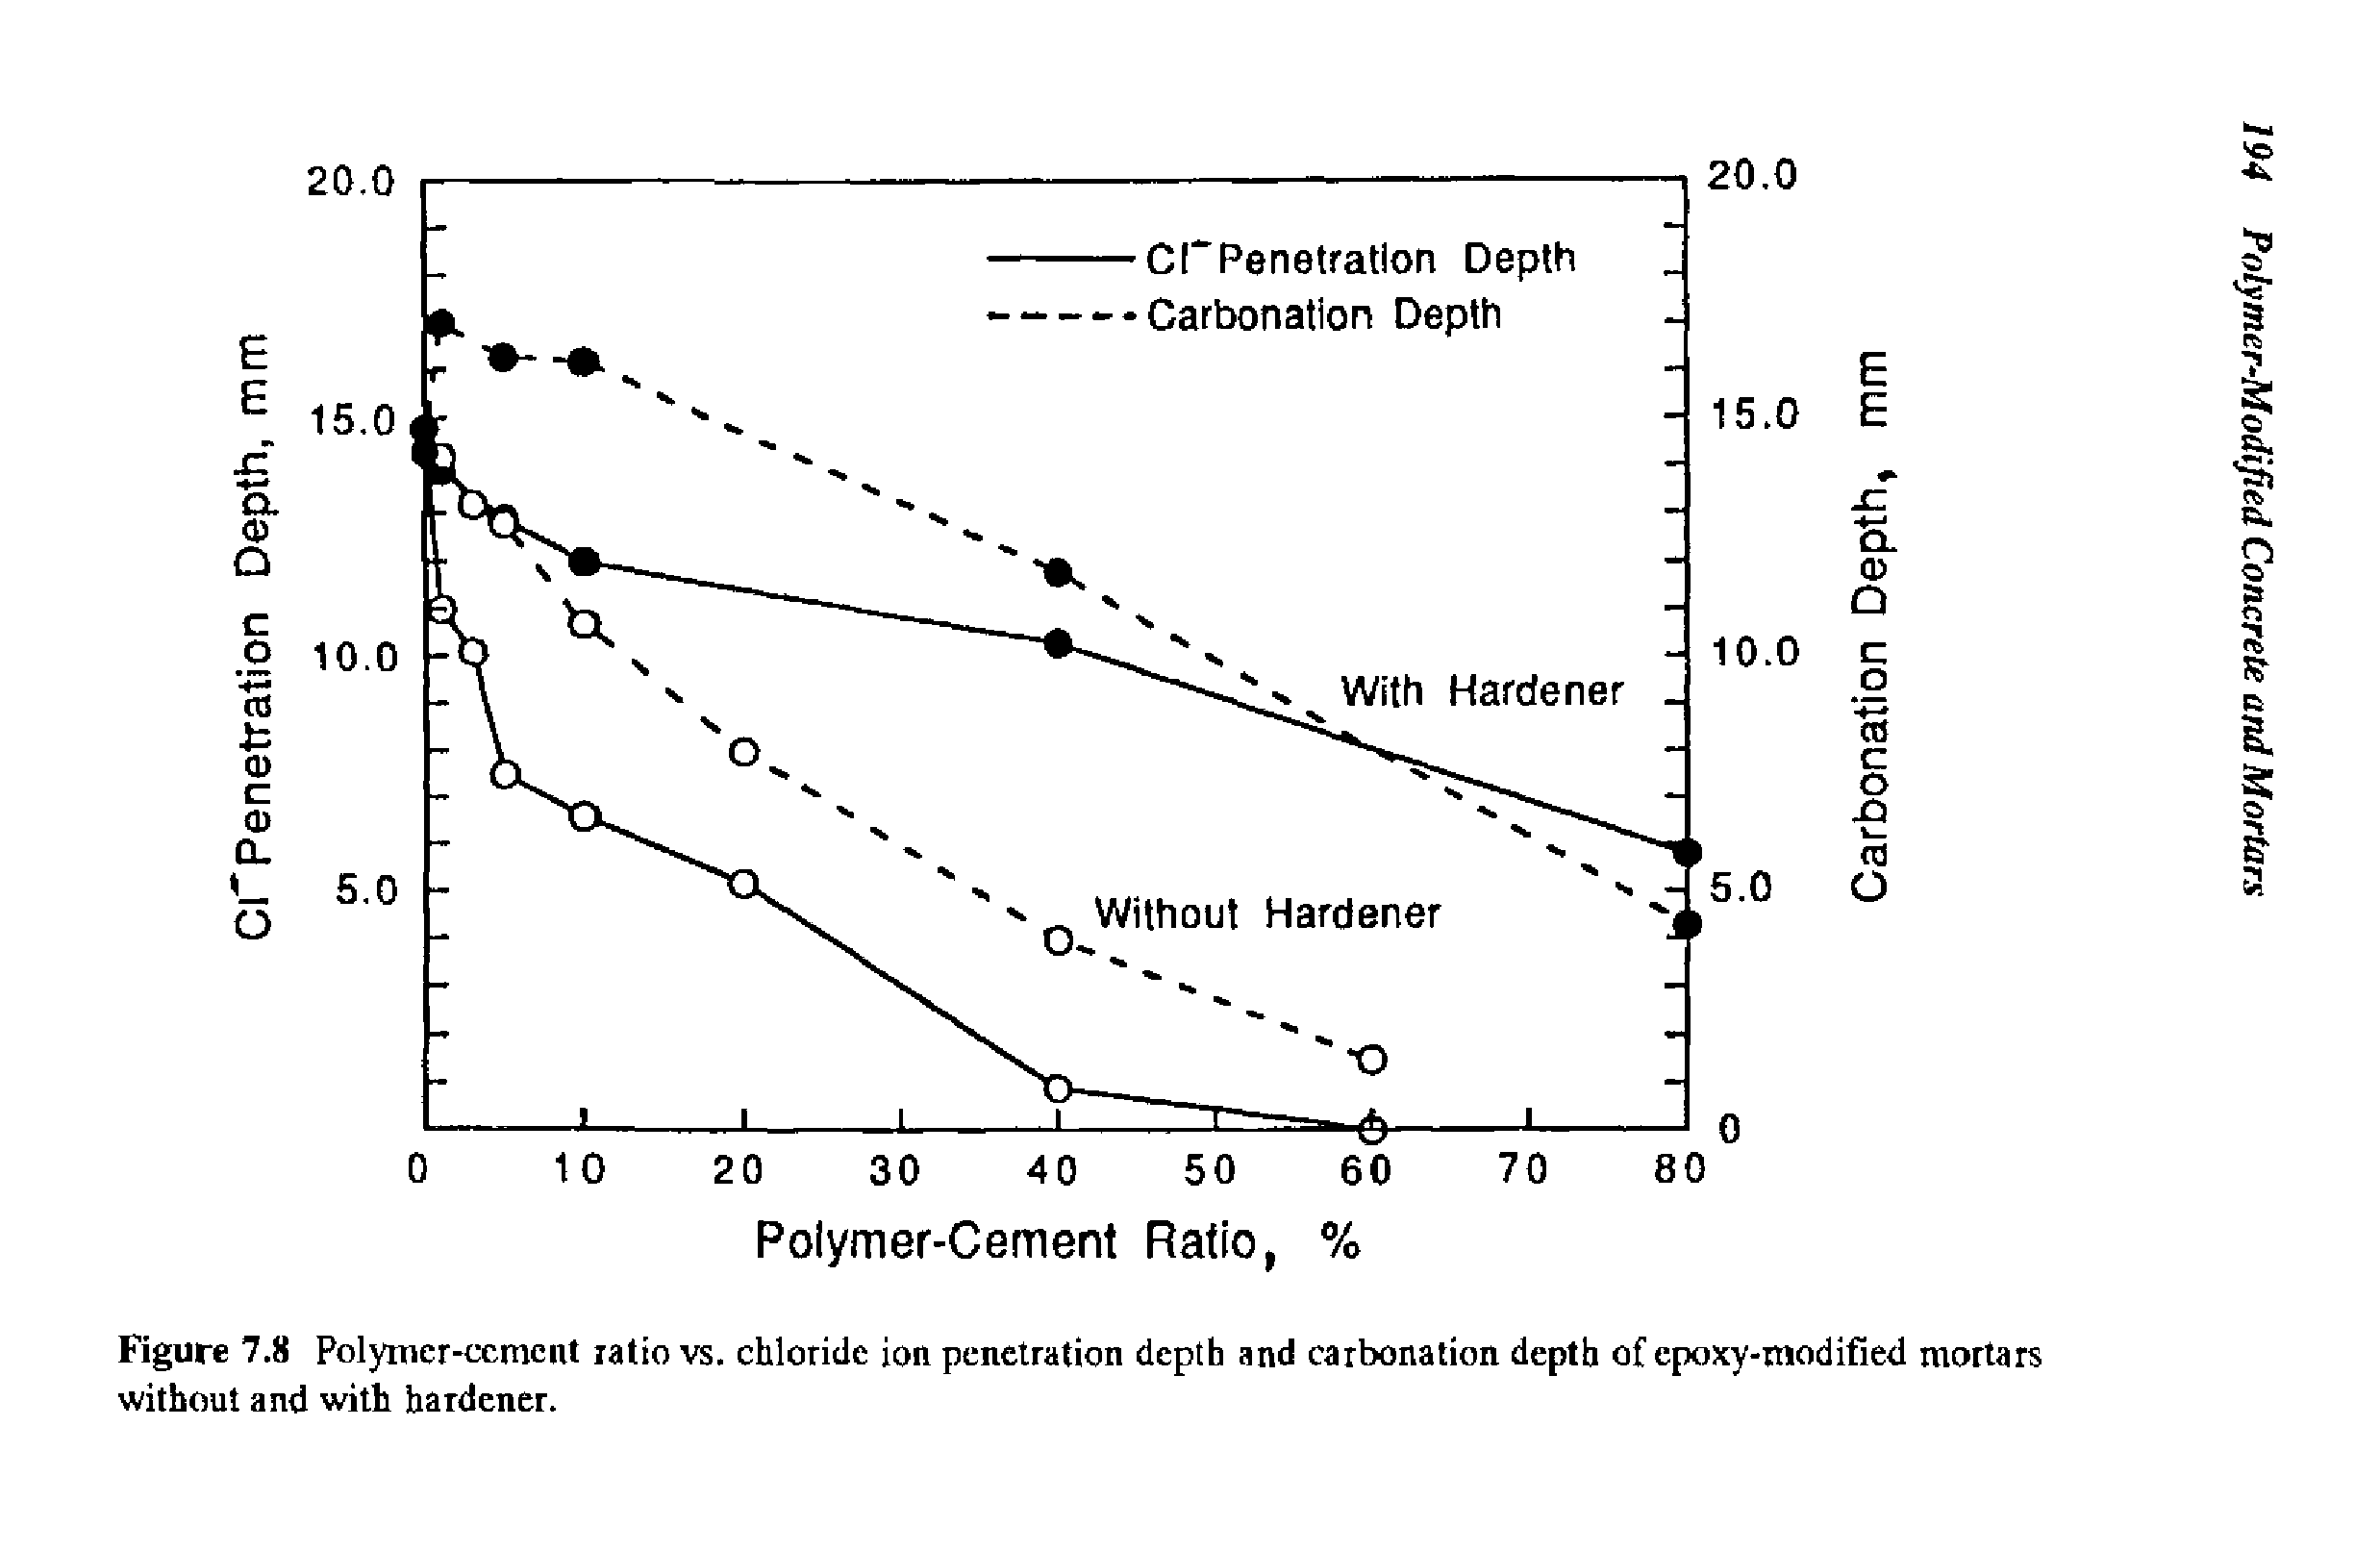 Figure 7.8 Polynicr-ccmcnt ratio vs. chloride ion penetration depth and carbonation depth of epoxy-modified mortars without and with hardener.